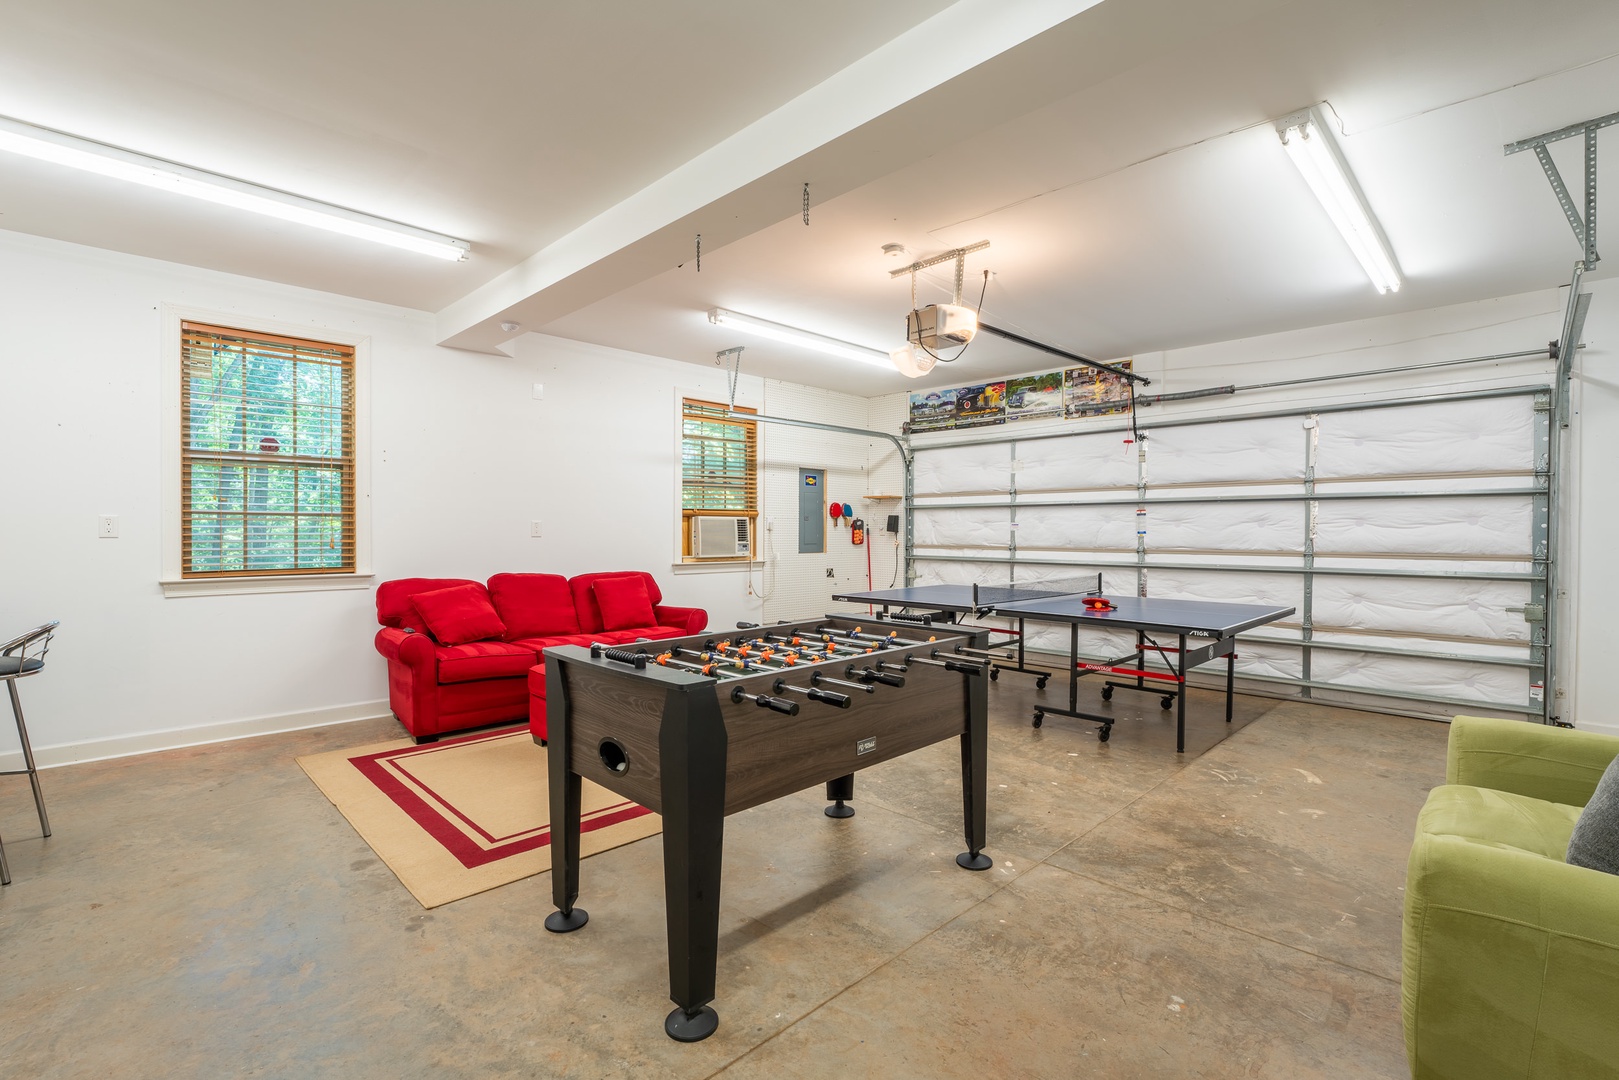 Garage - game room with TV, foosball, and table tennis